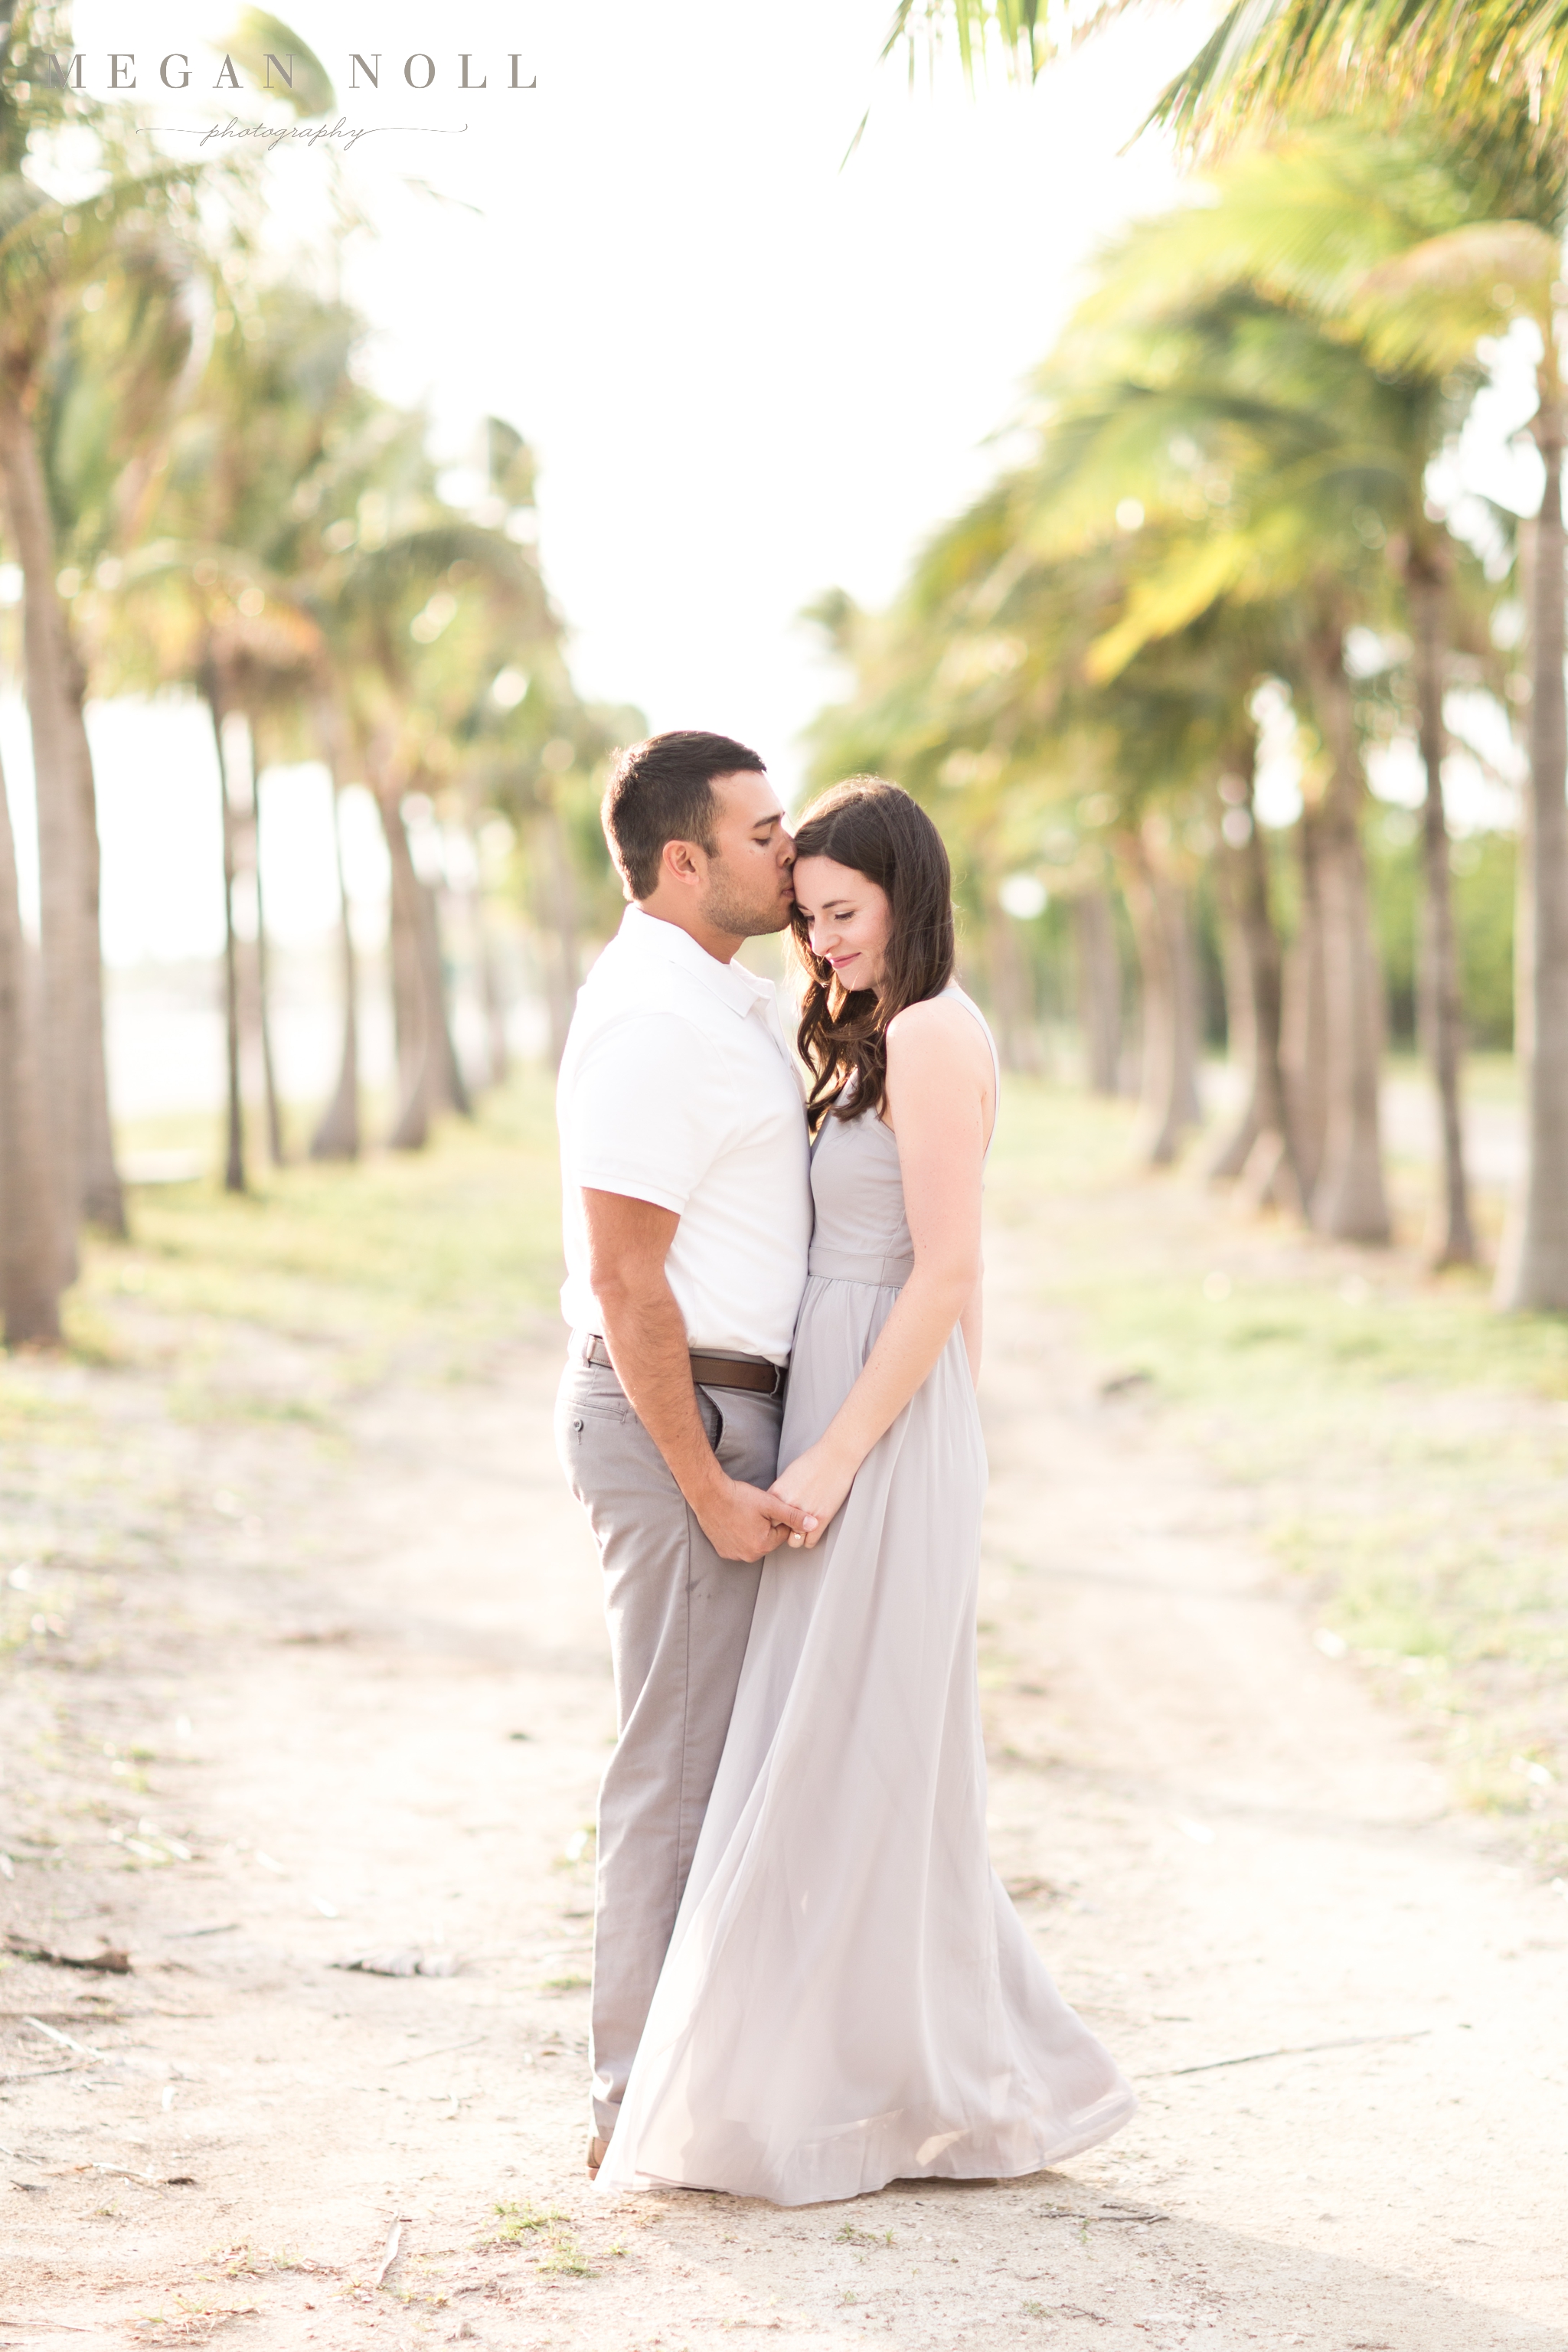 When should you book your wedding photographer, key west engagement picture, groom kissing bride's forehead, palm trees